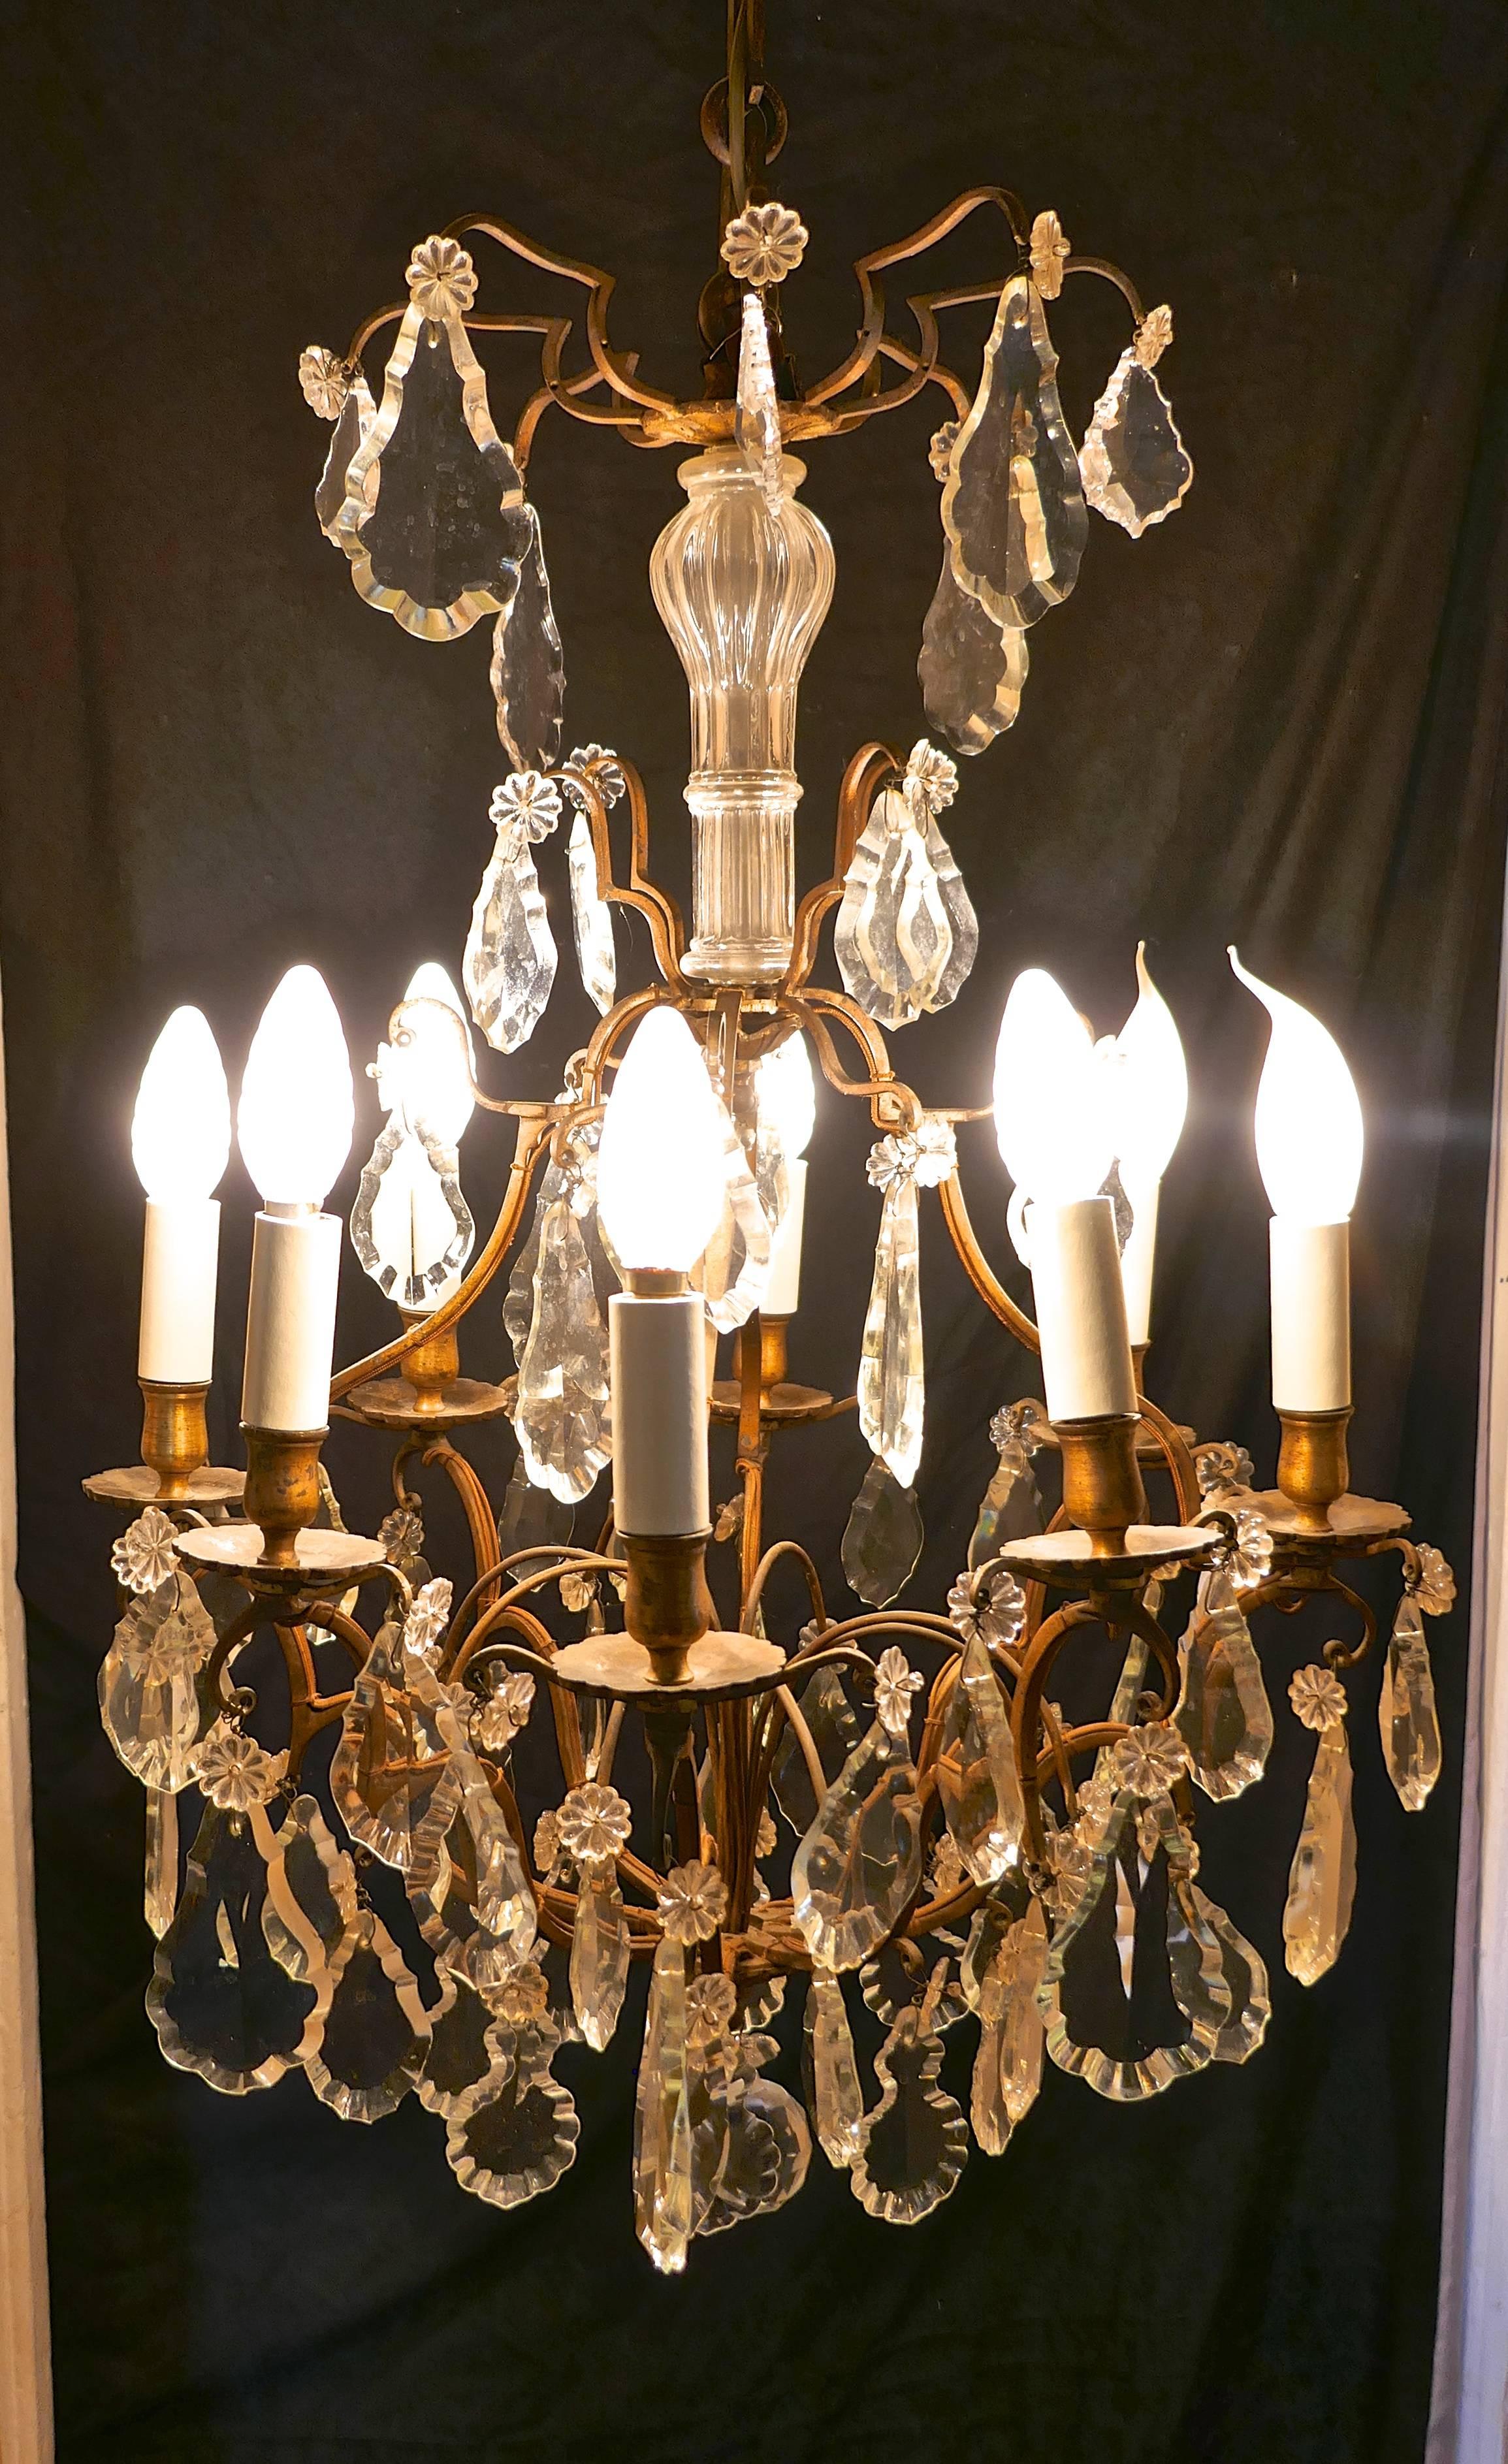 Rococo Revival Stunning Large French Eight-Branch Chandelier